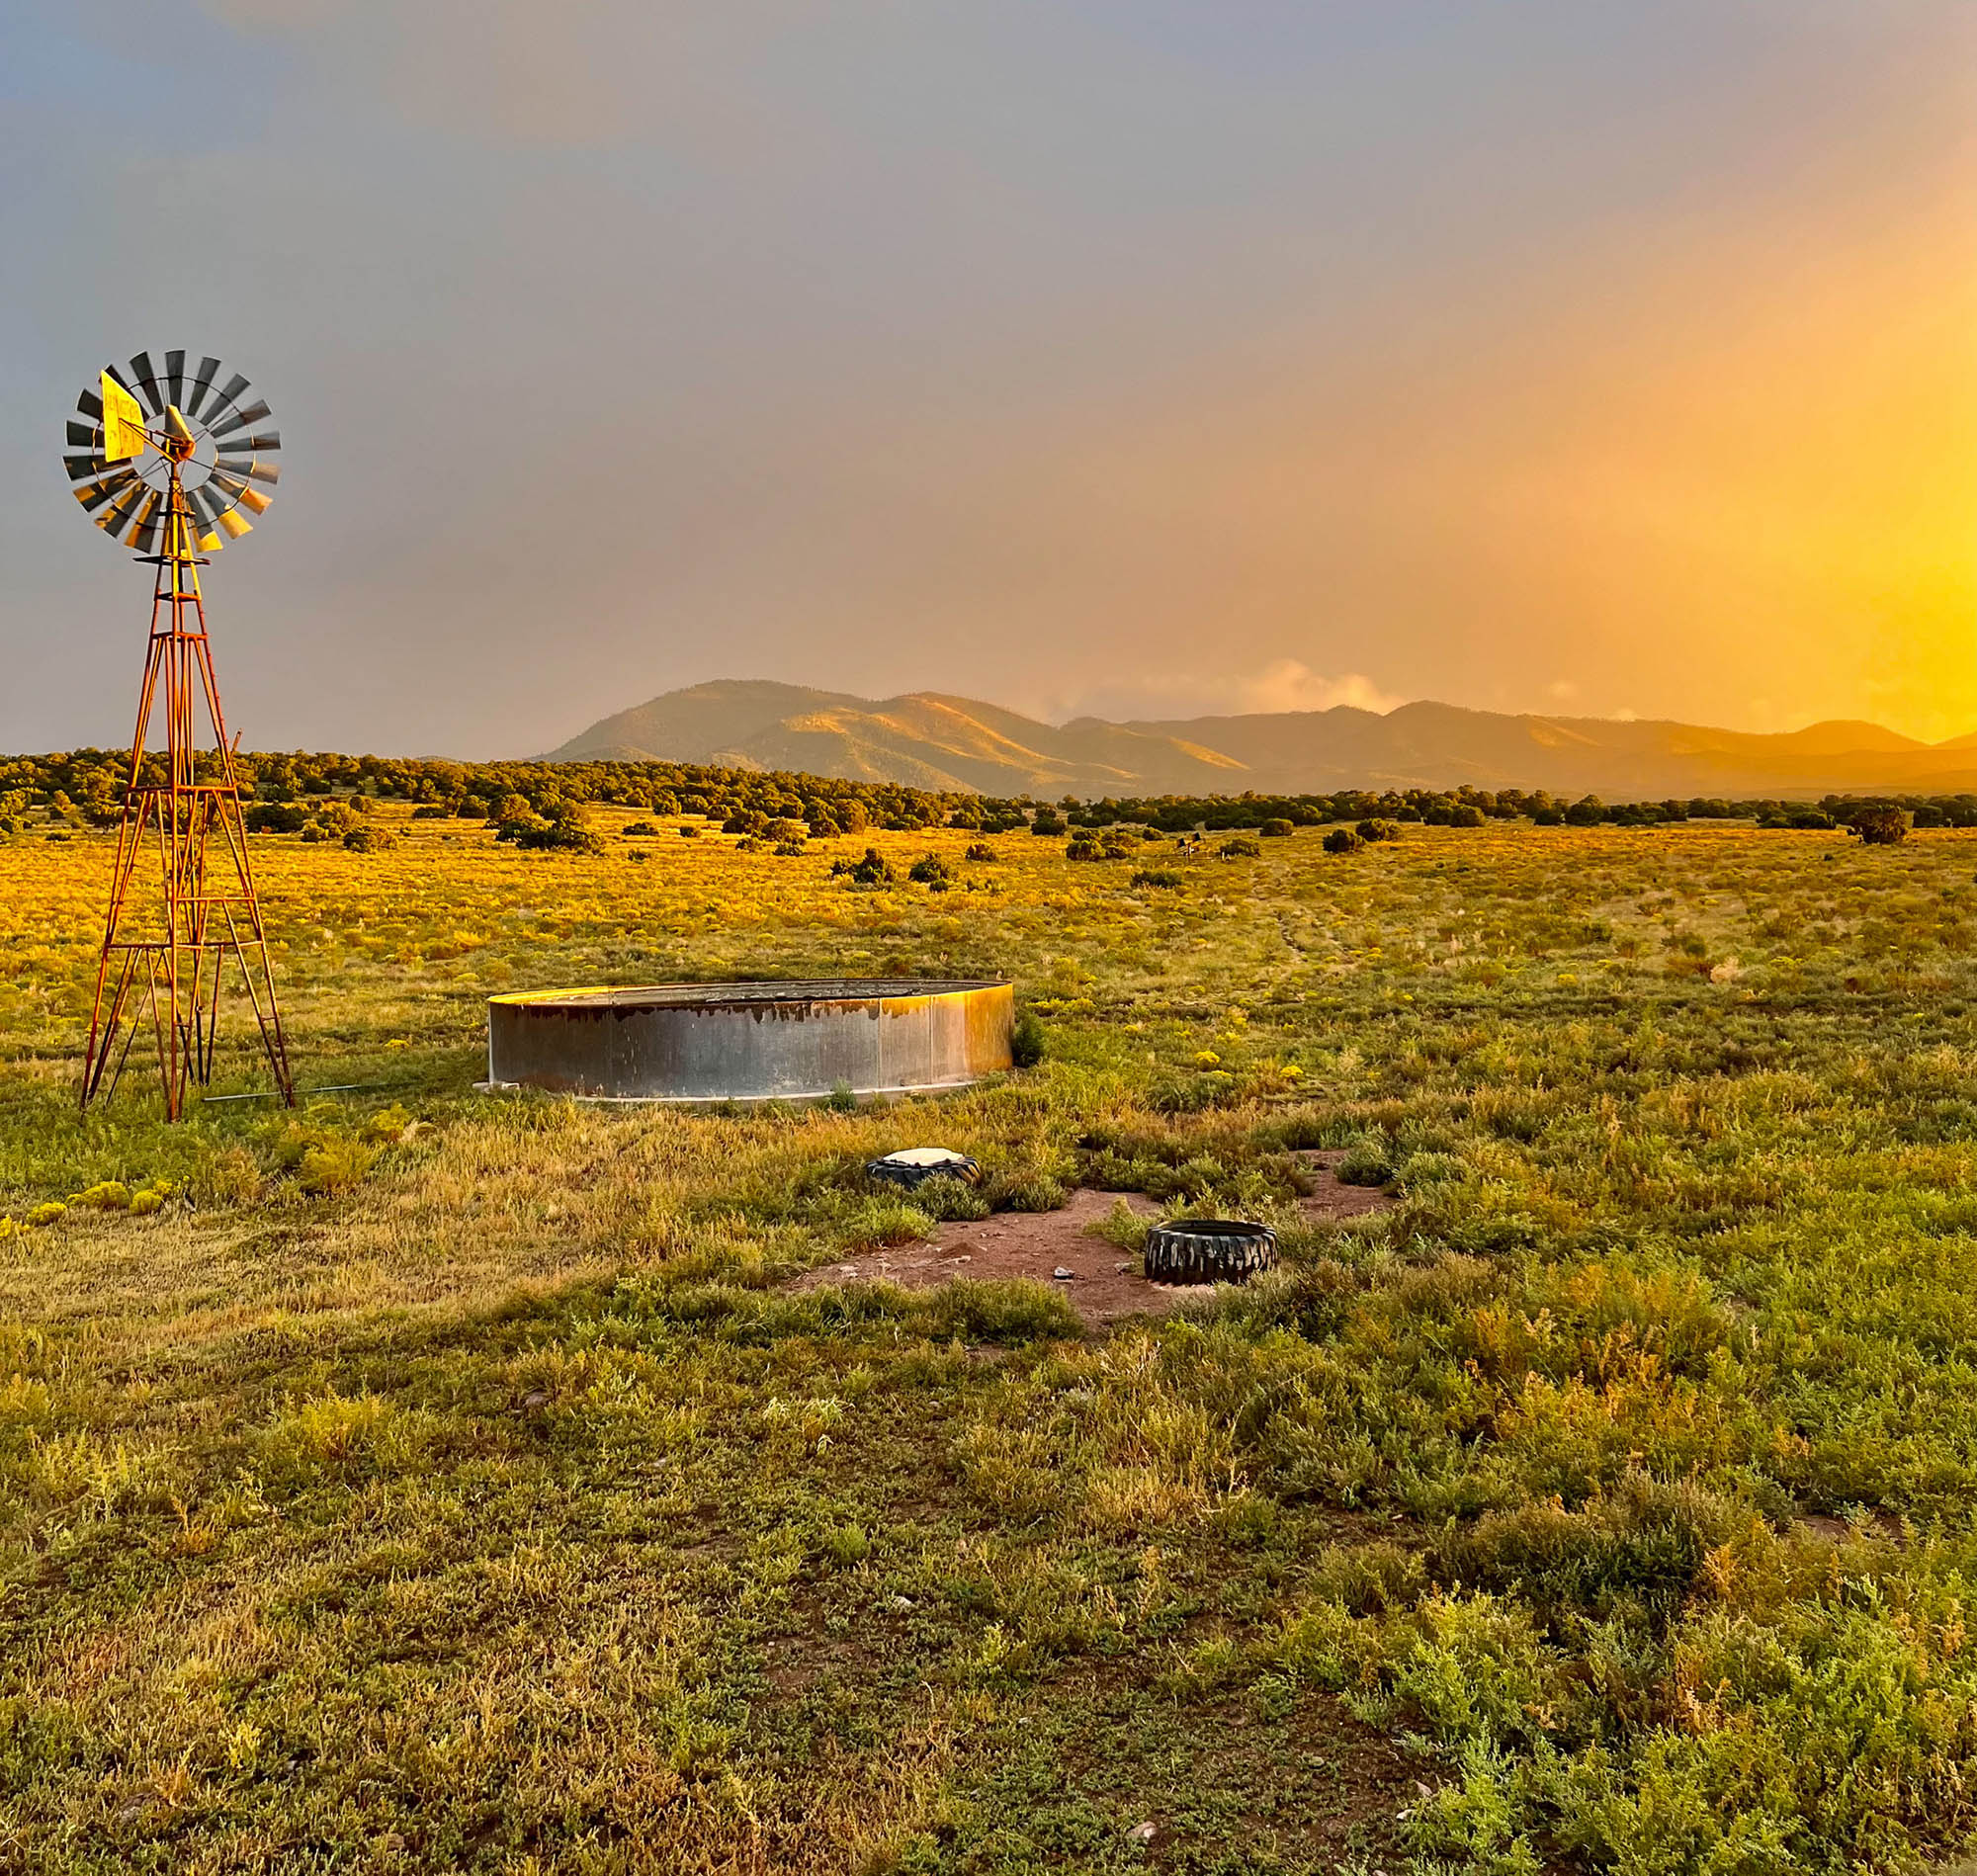 A sunny watering hole and windmill in new mexico.